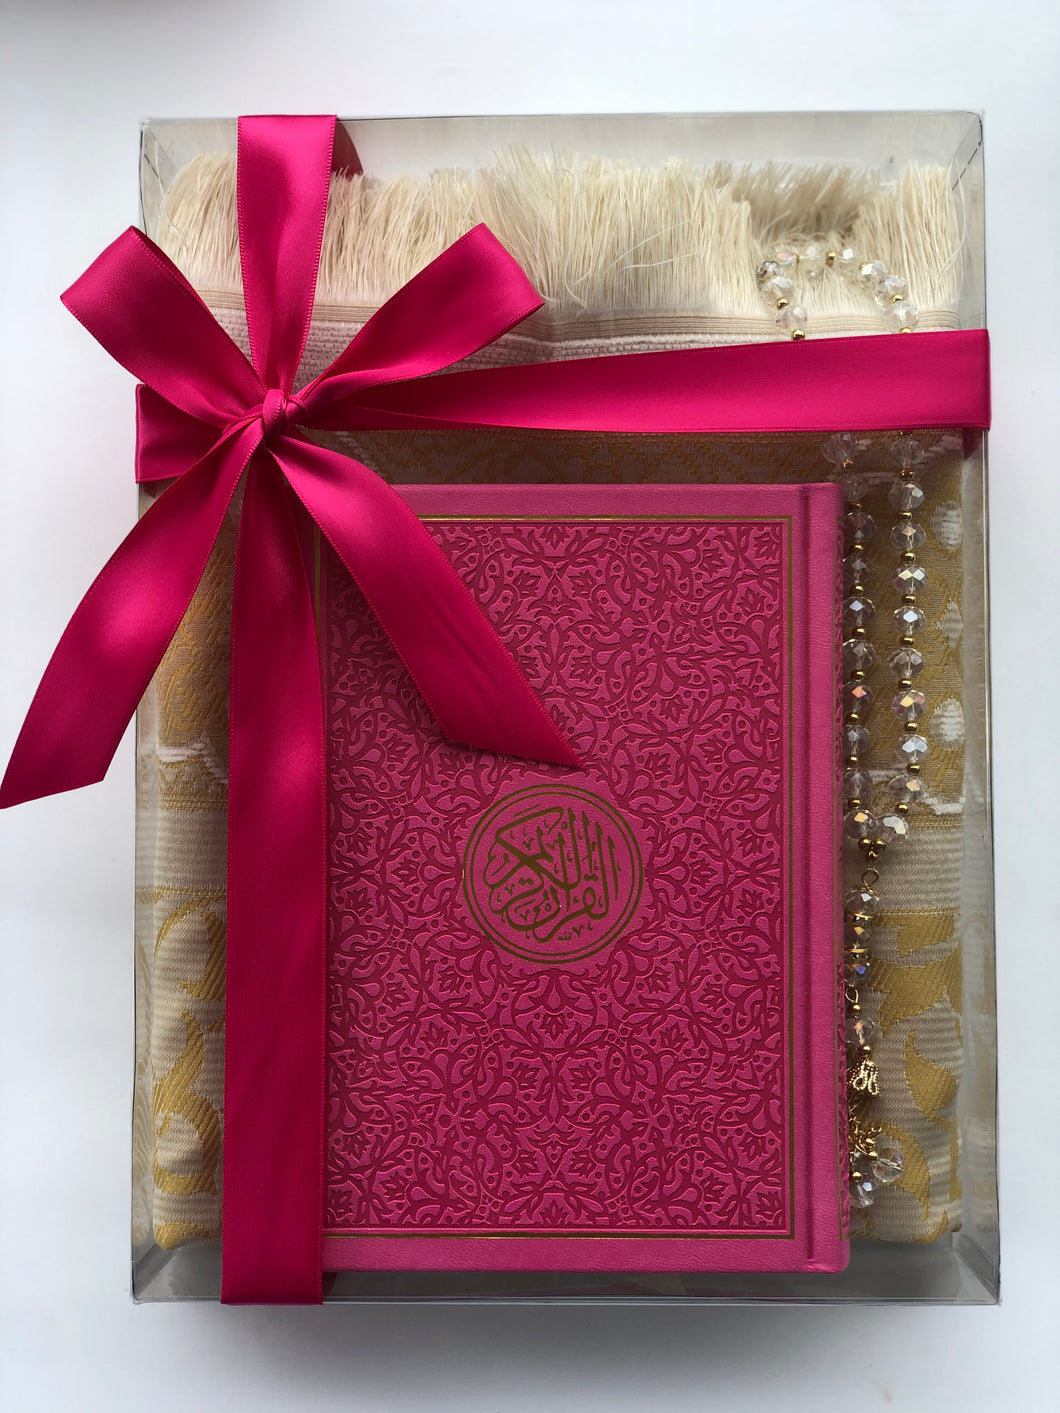 Hot Pink Quran Gift Set - My Islamic Gift House rainbow leather Quran 